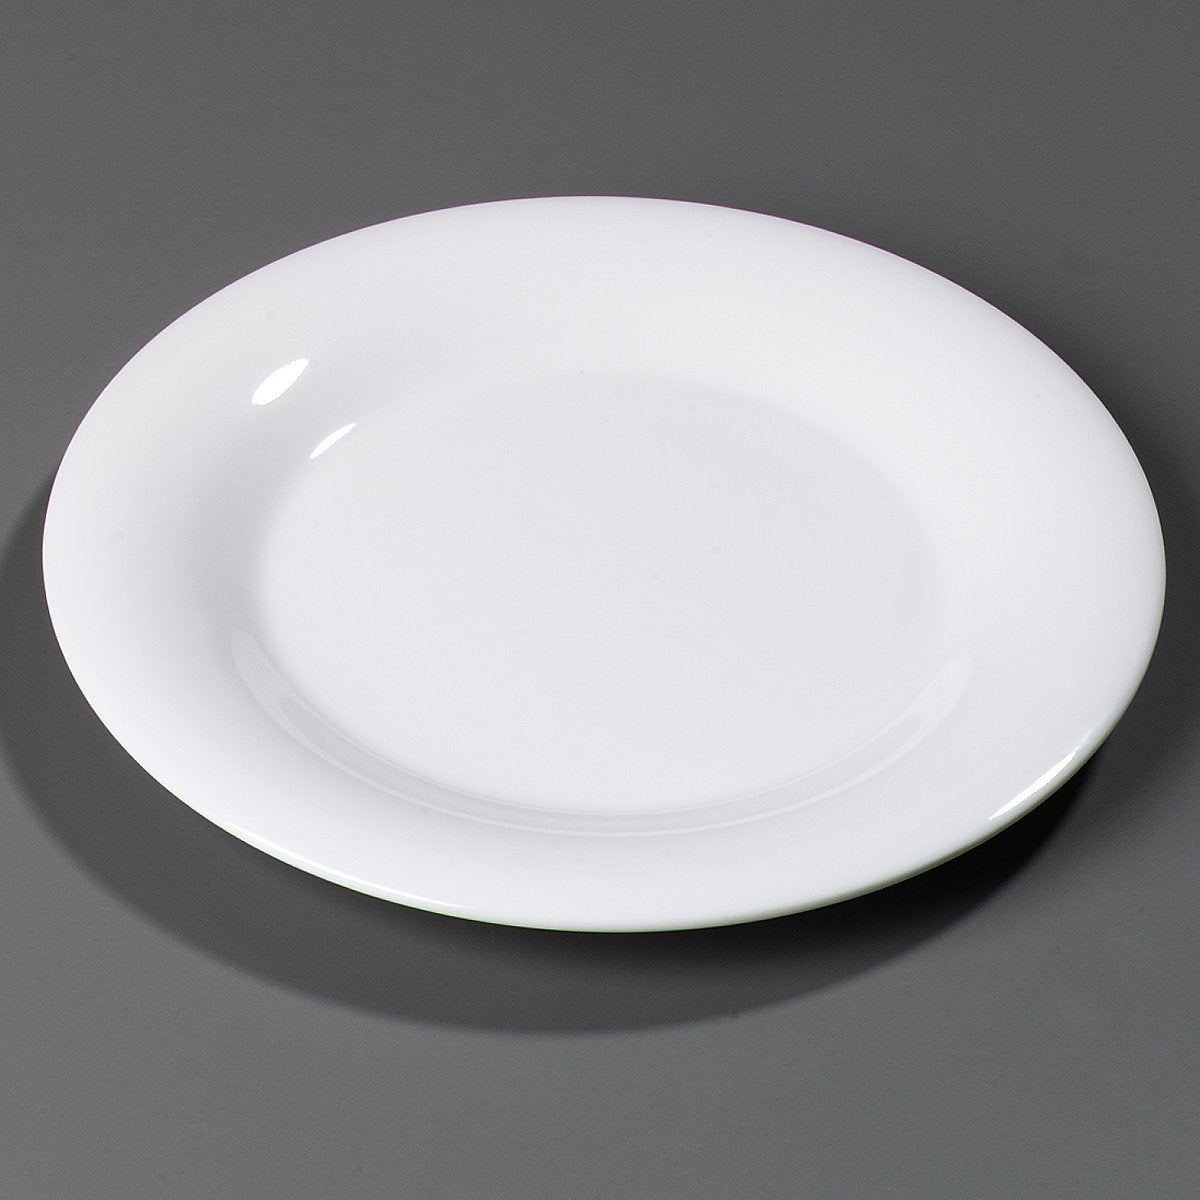 Carlisle FoodService Products 3301002 Sierrus Wide Rim Melamine Dinner Plates, 10.5", White (Pack of 12)